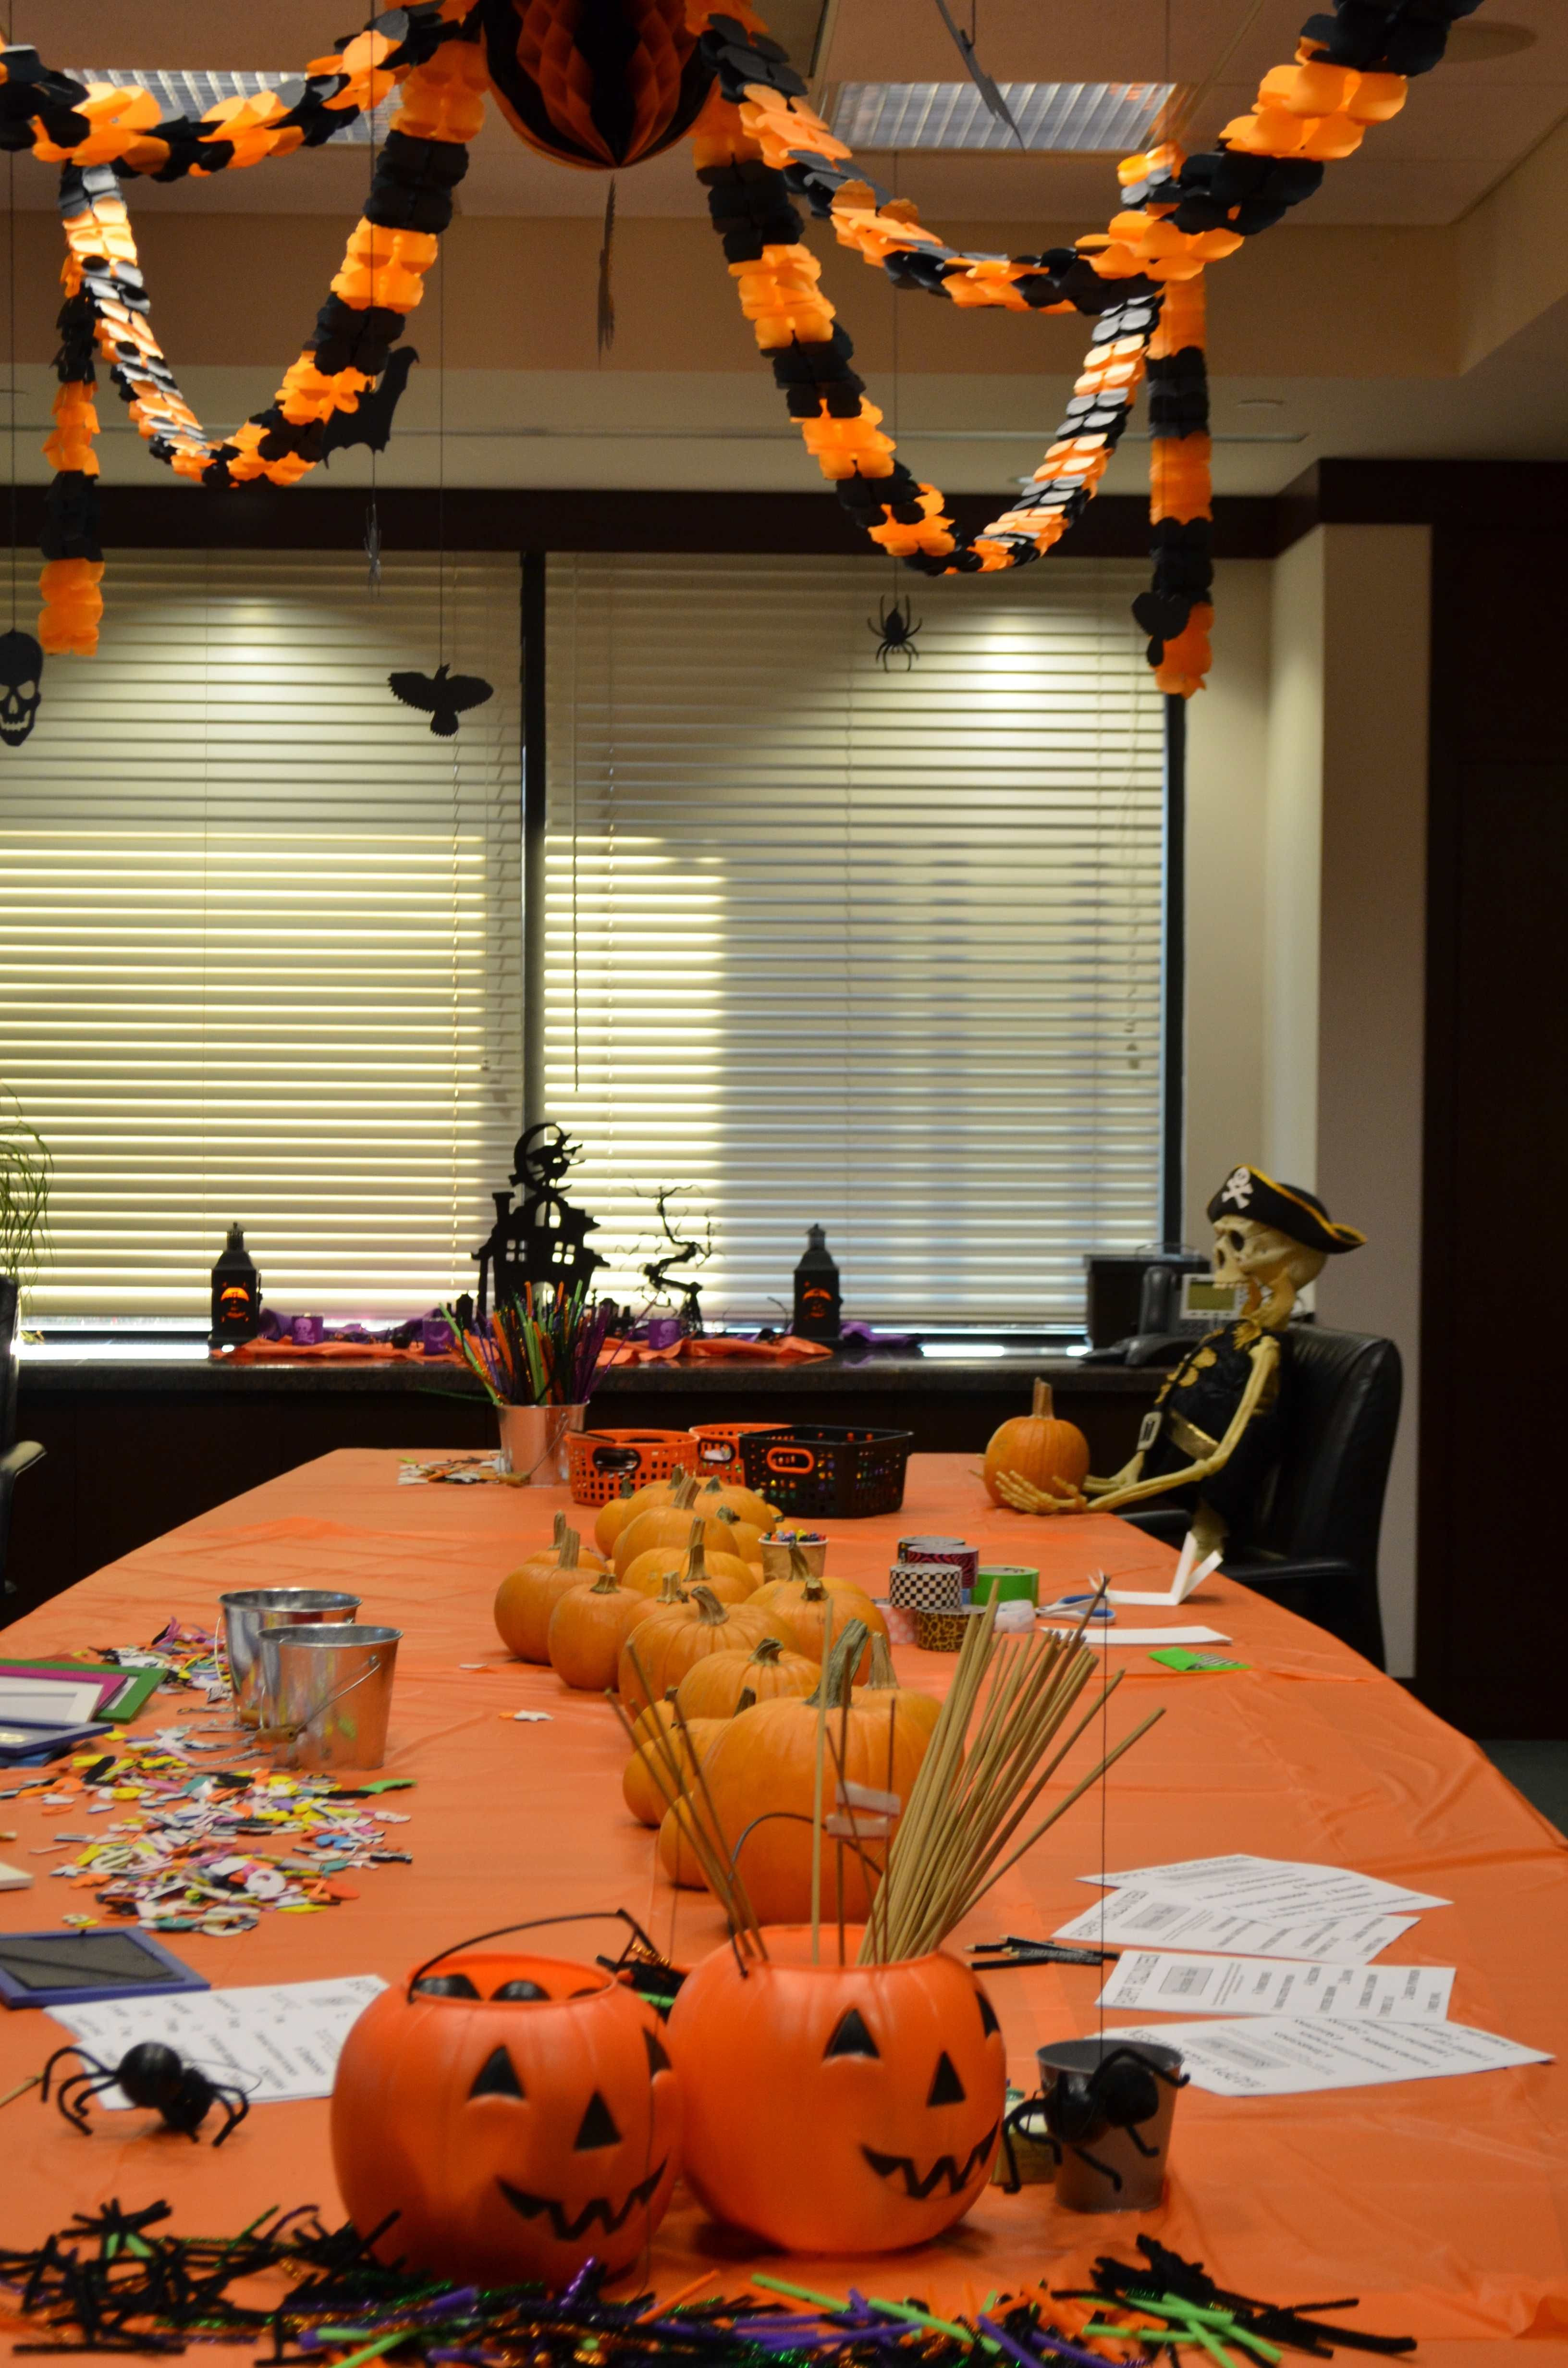 Office Halloween Party Ideas
 Halloween decorations for an office by kidsposhparties